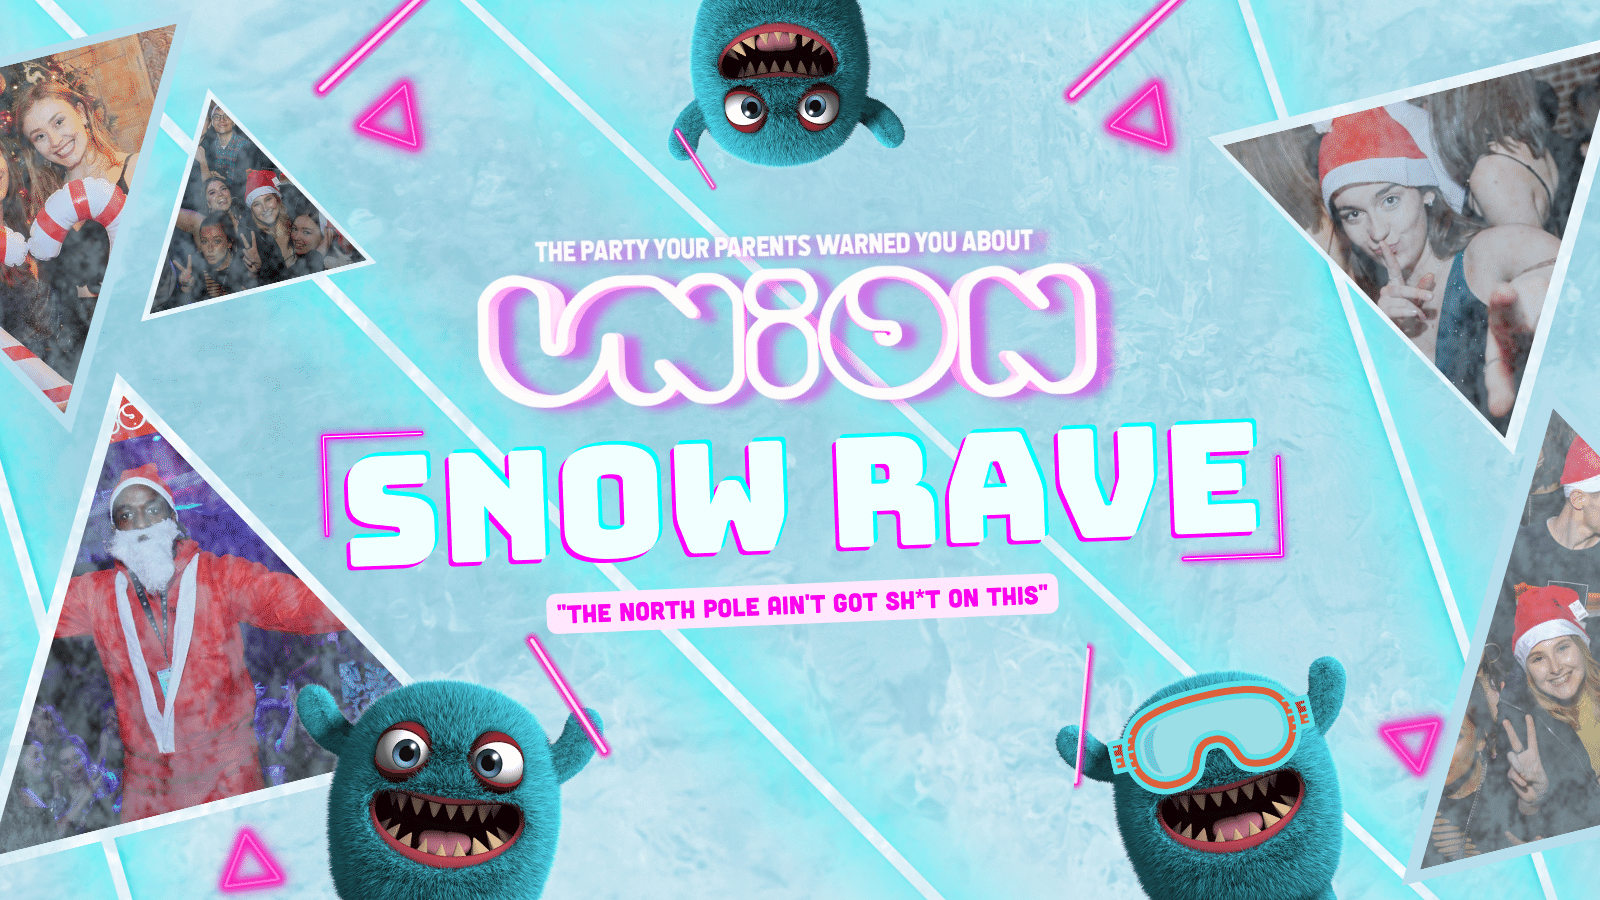 UNION TUESDAY’S PRESENTS THE SNOW RAVE